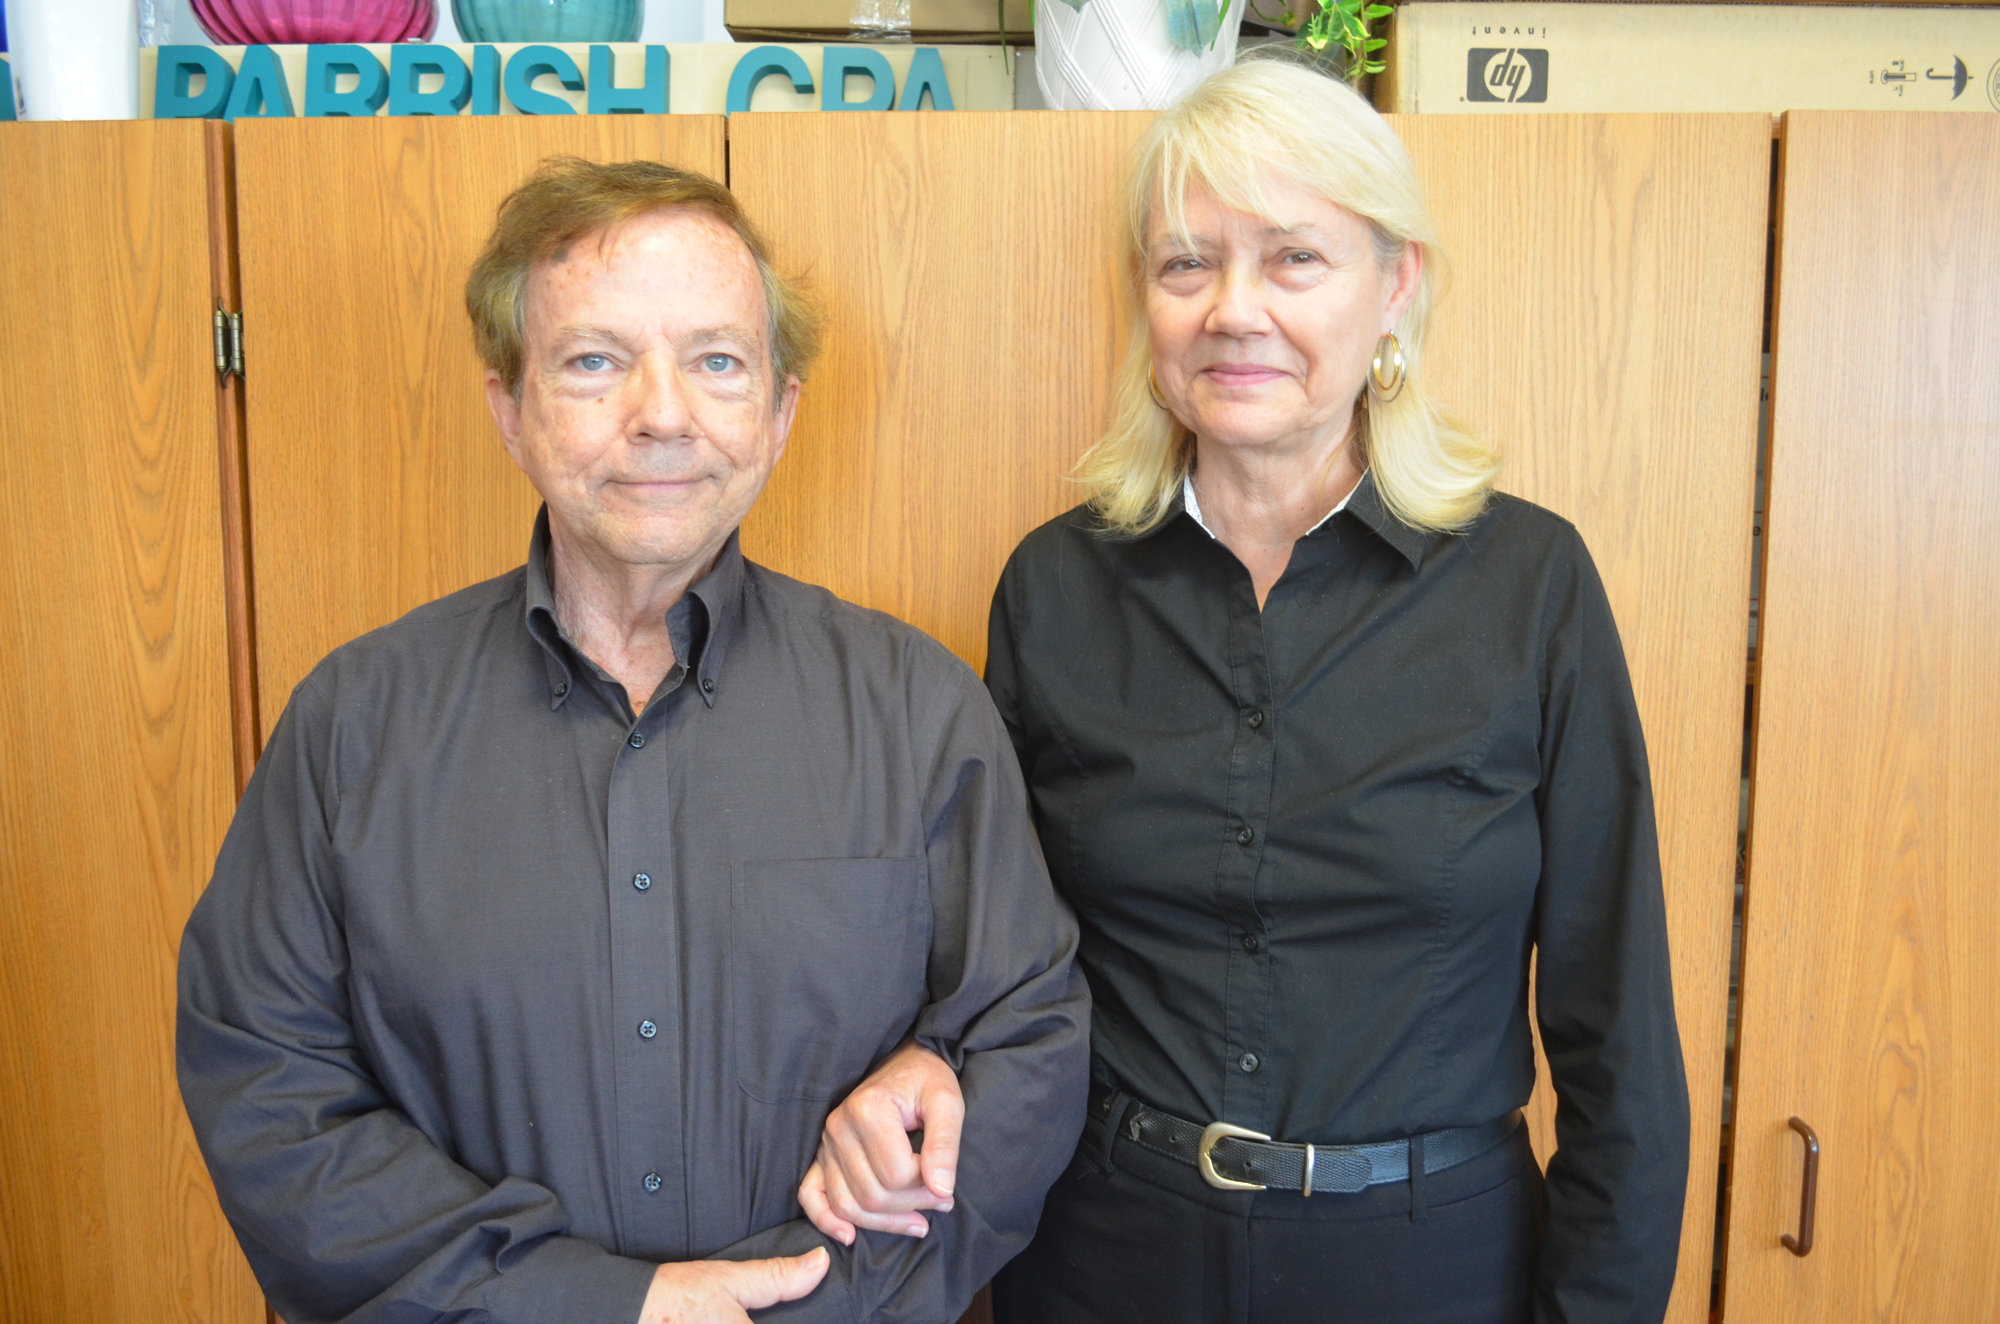 CPA Bob and Office Manager Mary Parrish, of Bob Parrish, CPA, P.C.